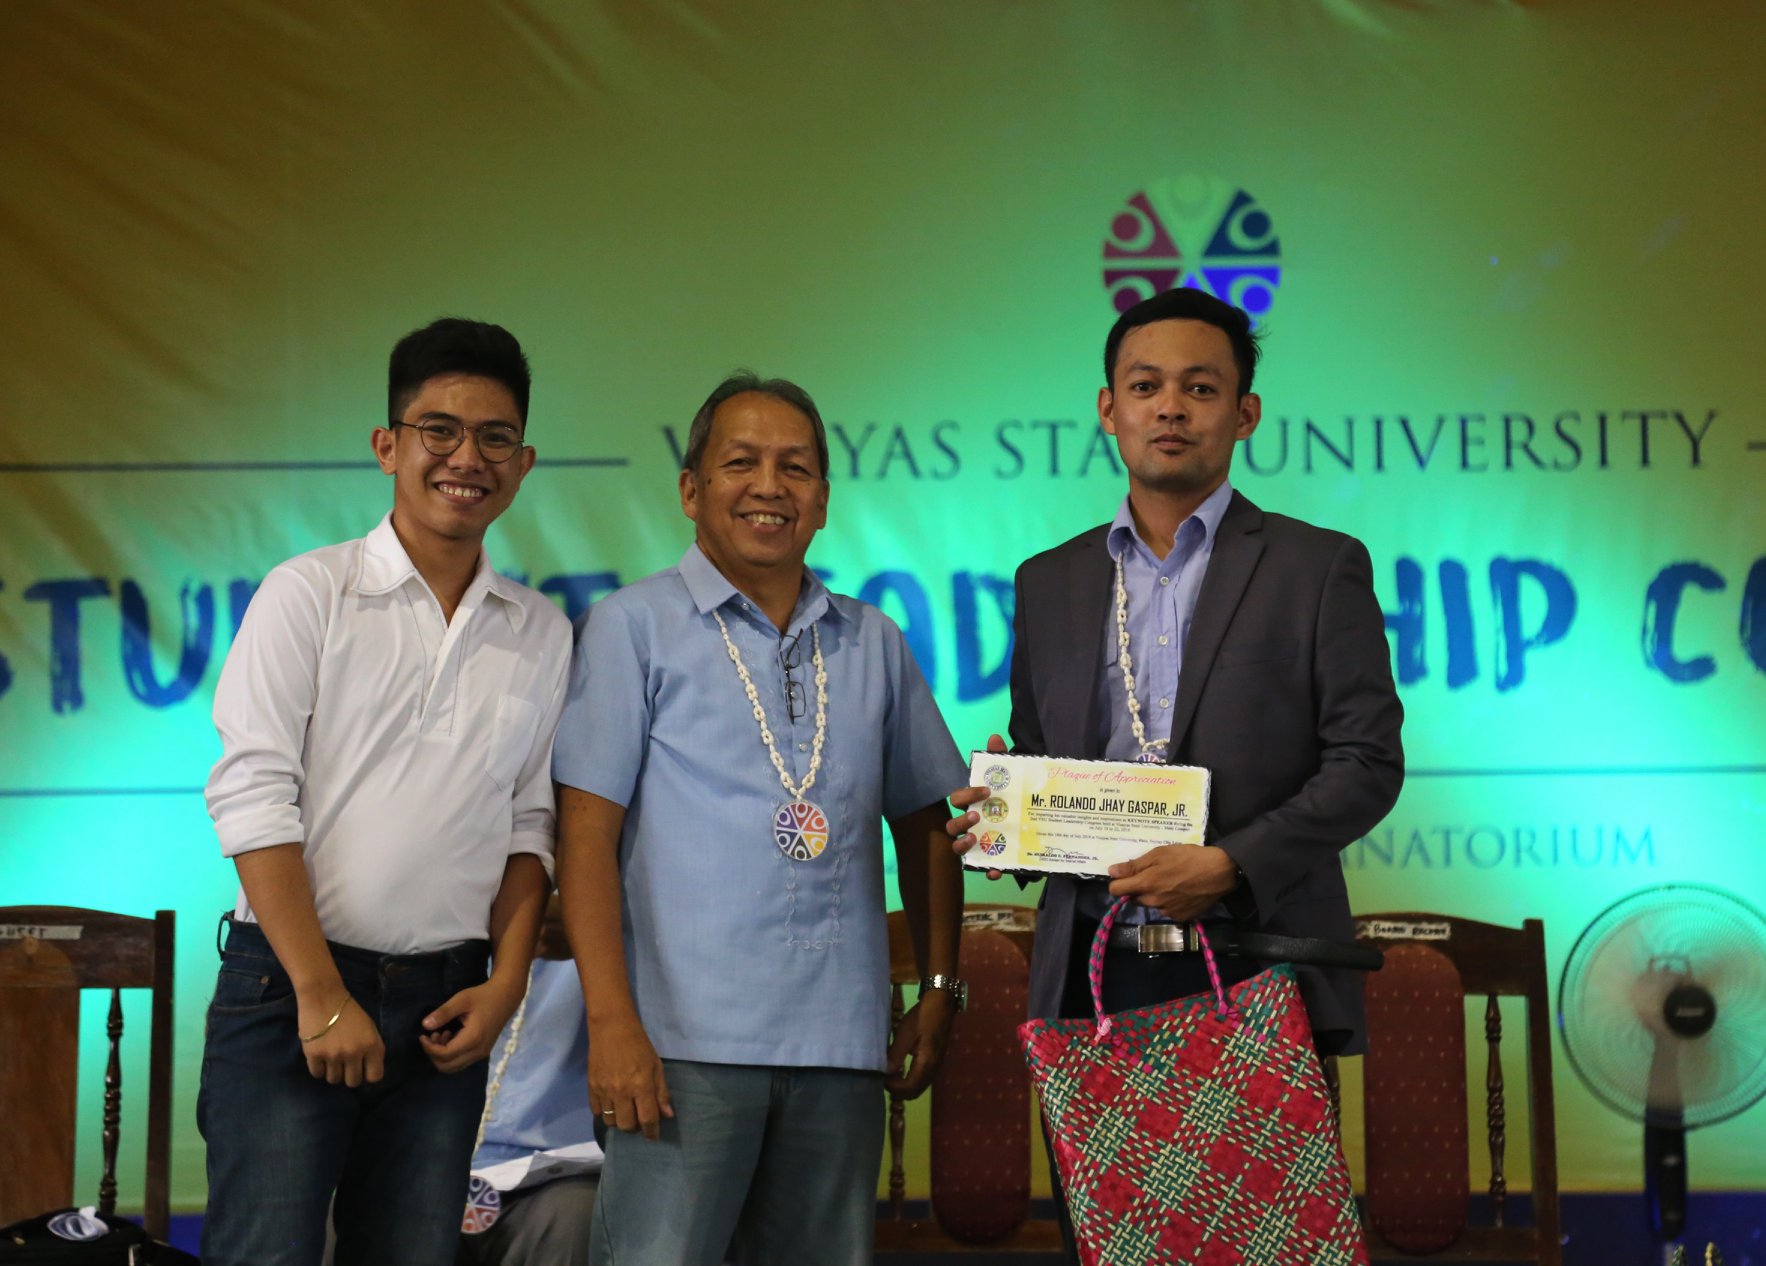 SECOND TERM. USSC President, John Allan Gulles with Dean of Students, Prof. Manolo B. Loreto and Ormoc City Youth Development Officer, Mr. Rolando Jhay Gaspar, Jr. during the second Student Leadership Congress. Photo from VSU Media Team